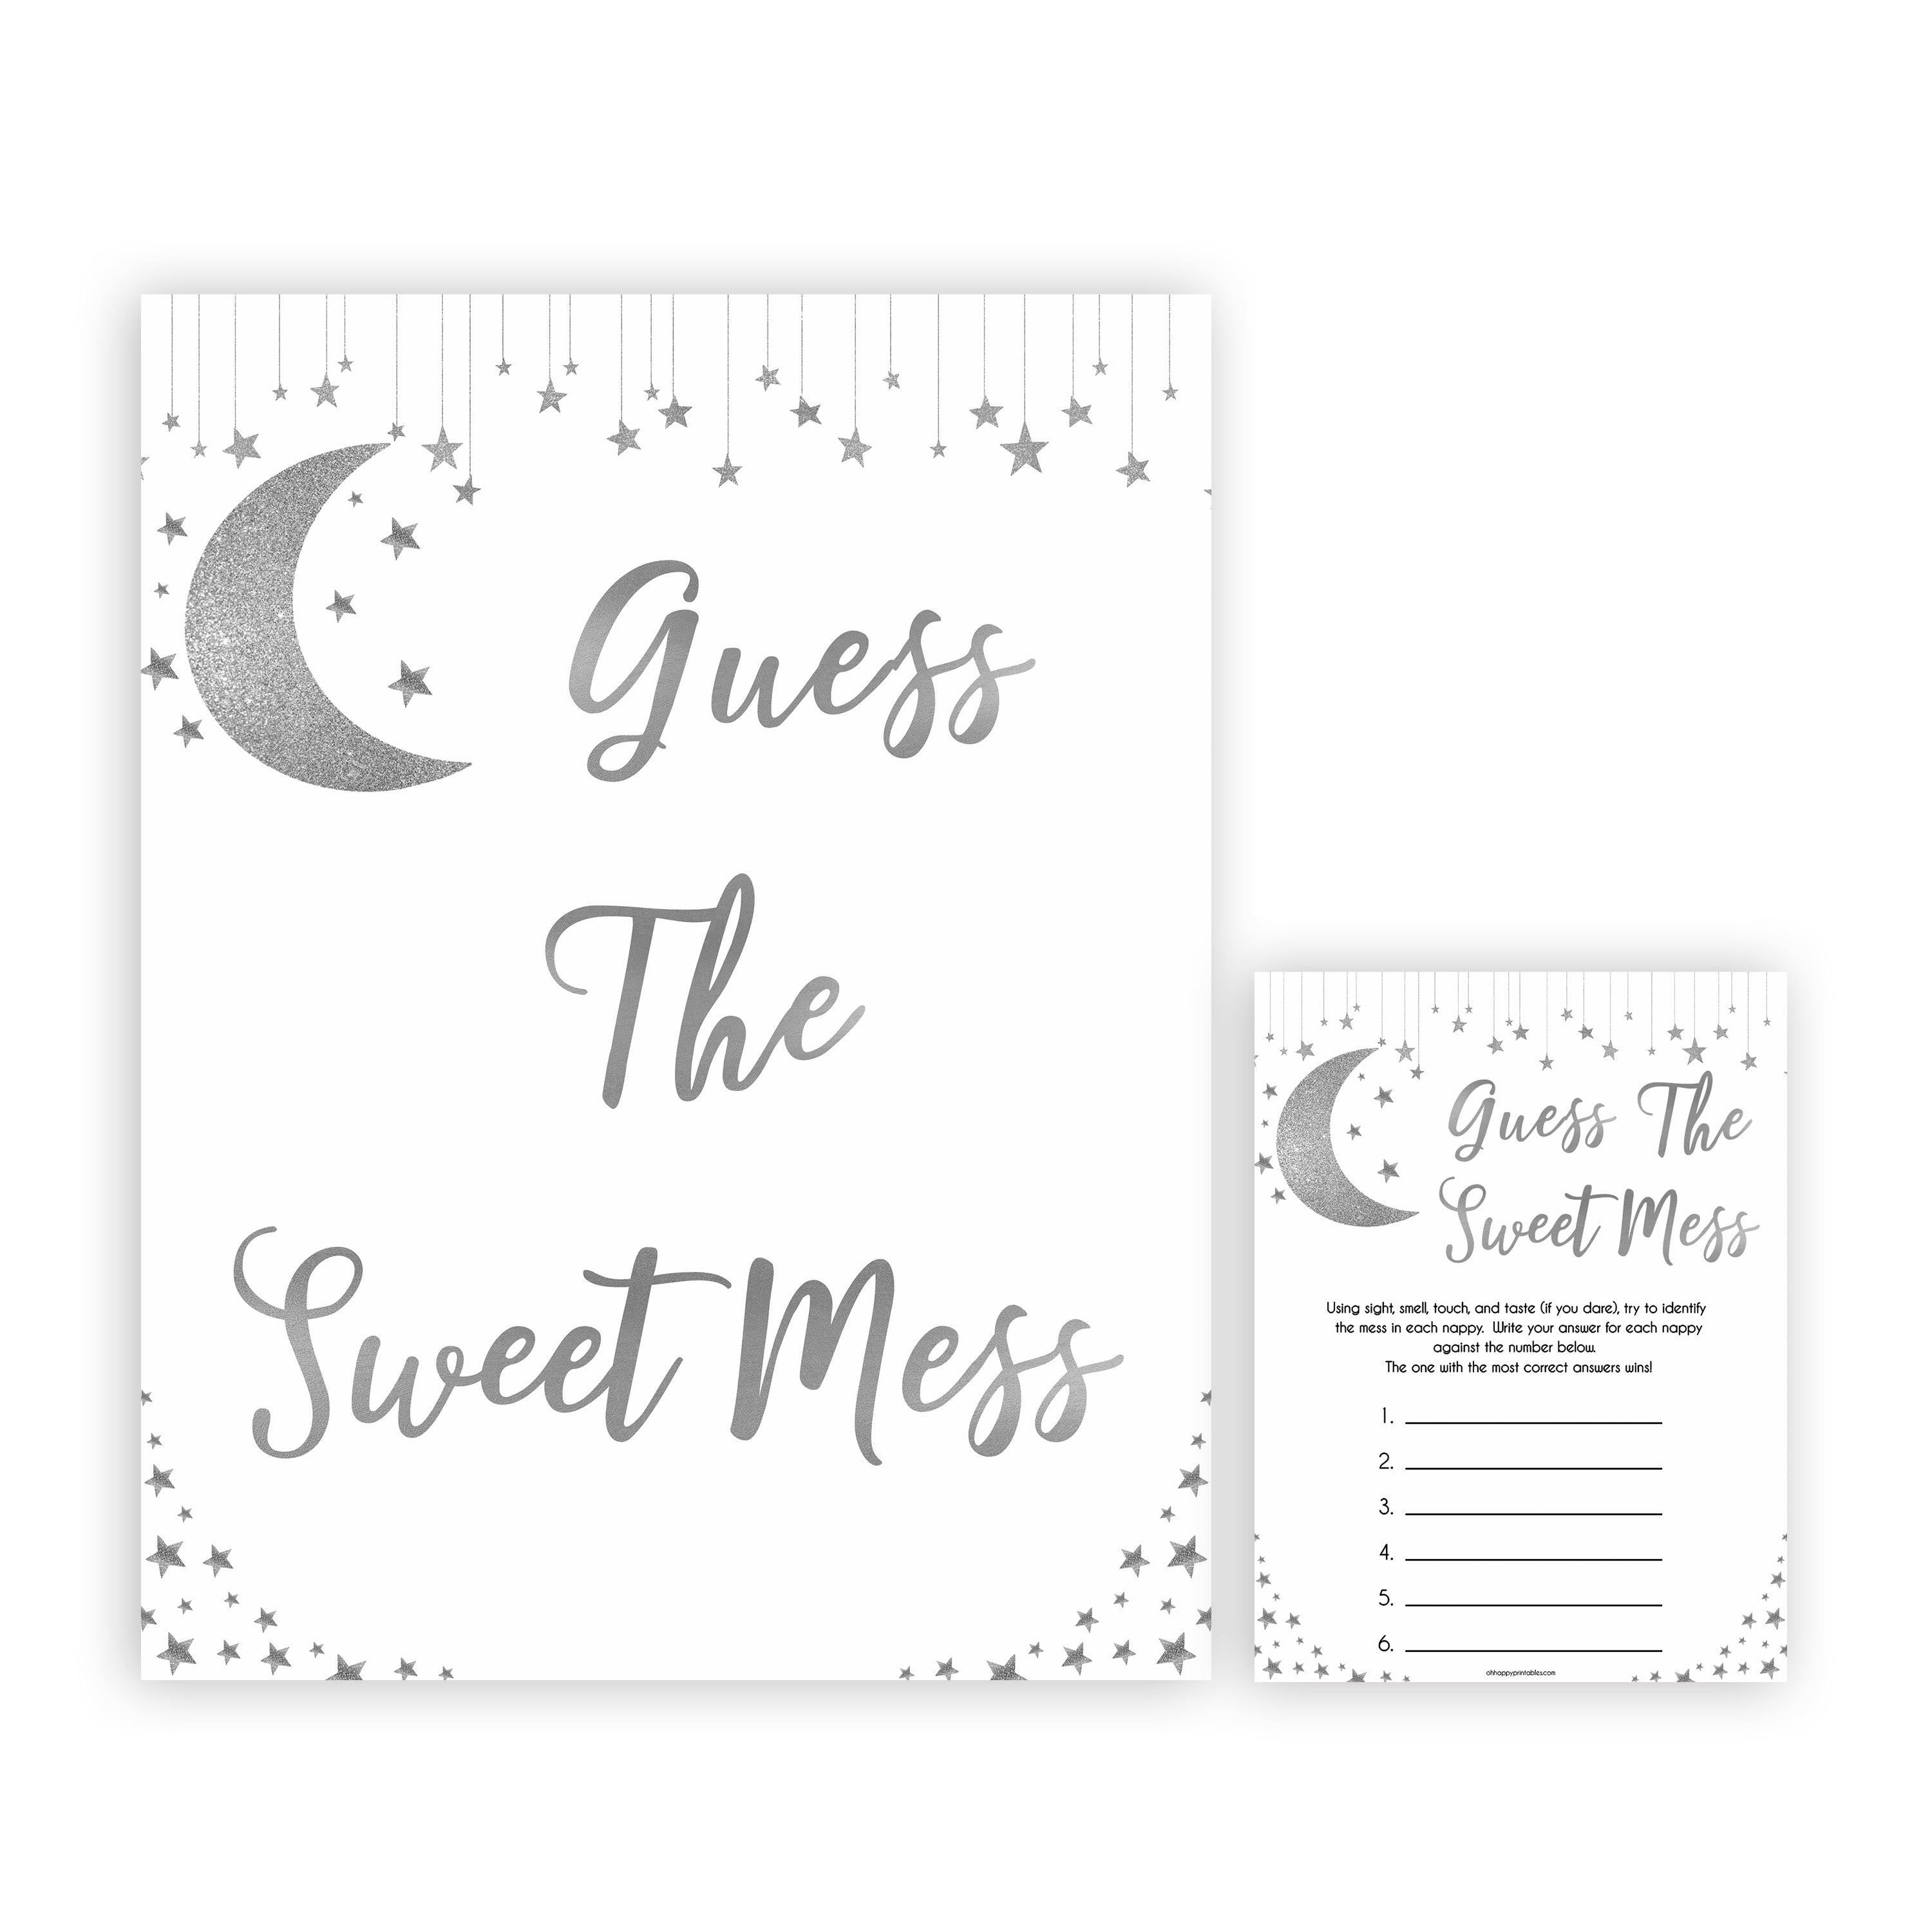 Silver little star, guess the sweet mess baby games, baby shower games, printable baby games, fun baby games, twinkle little star games, baby games, fun baby shower ideas, baby shower ideas